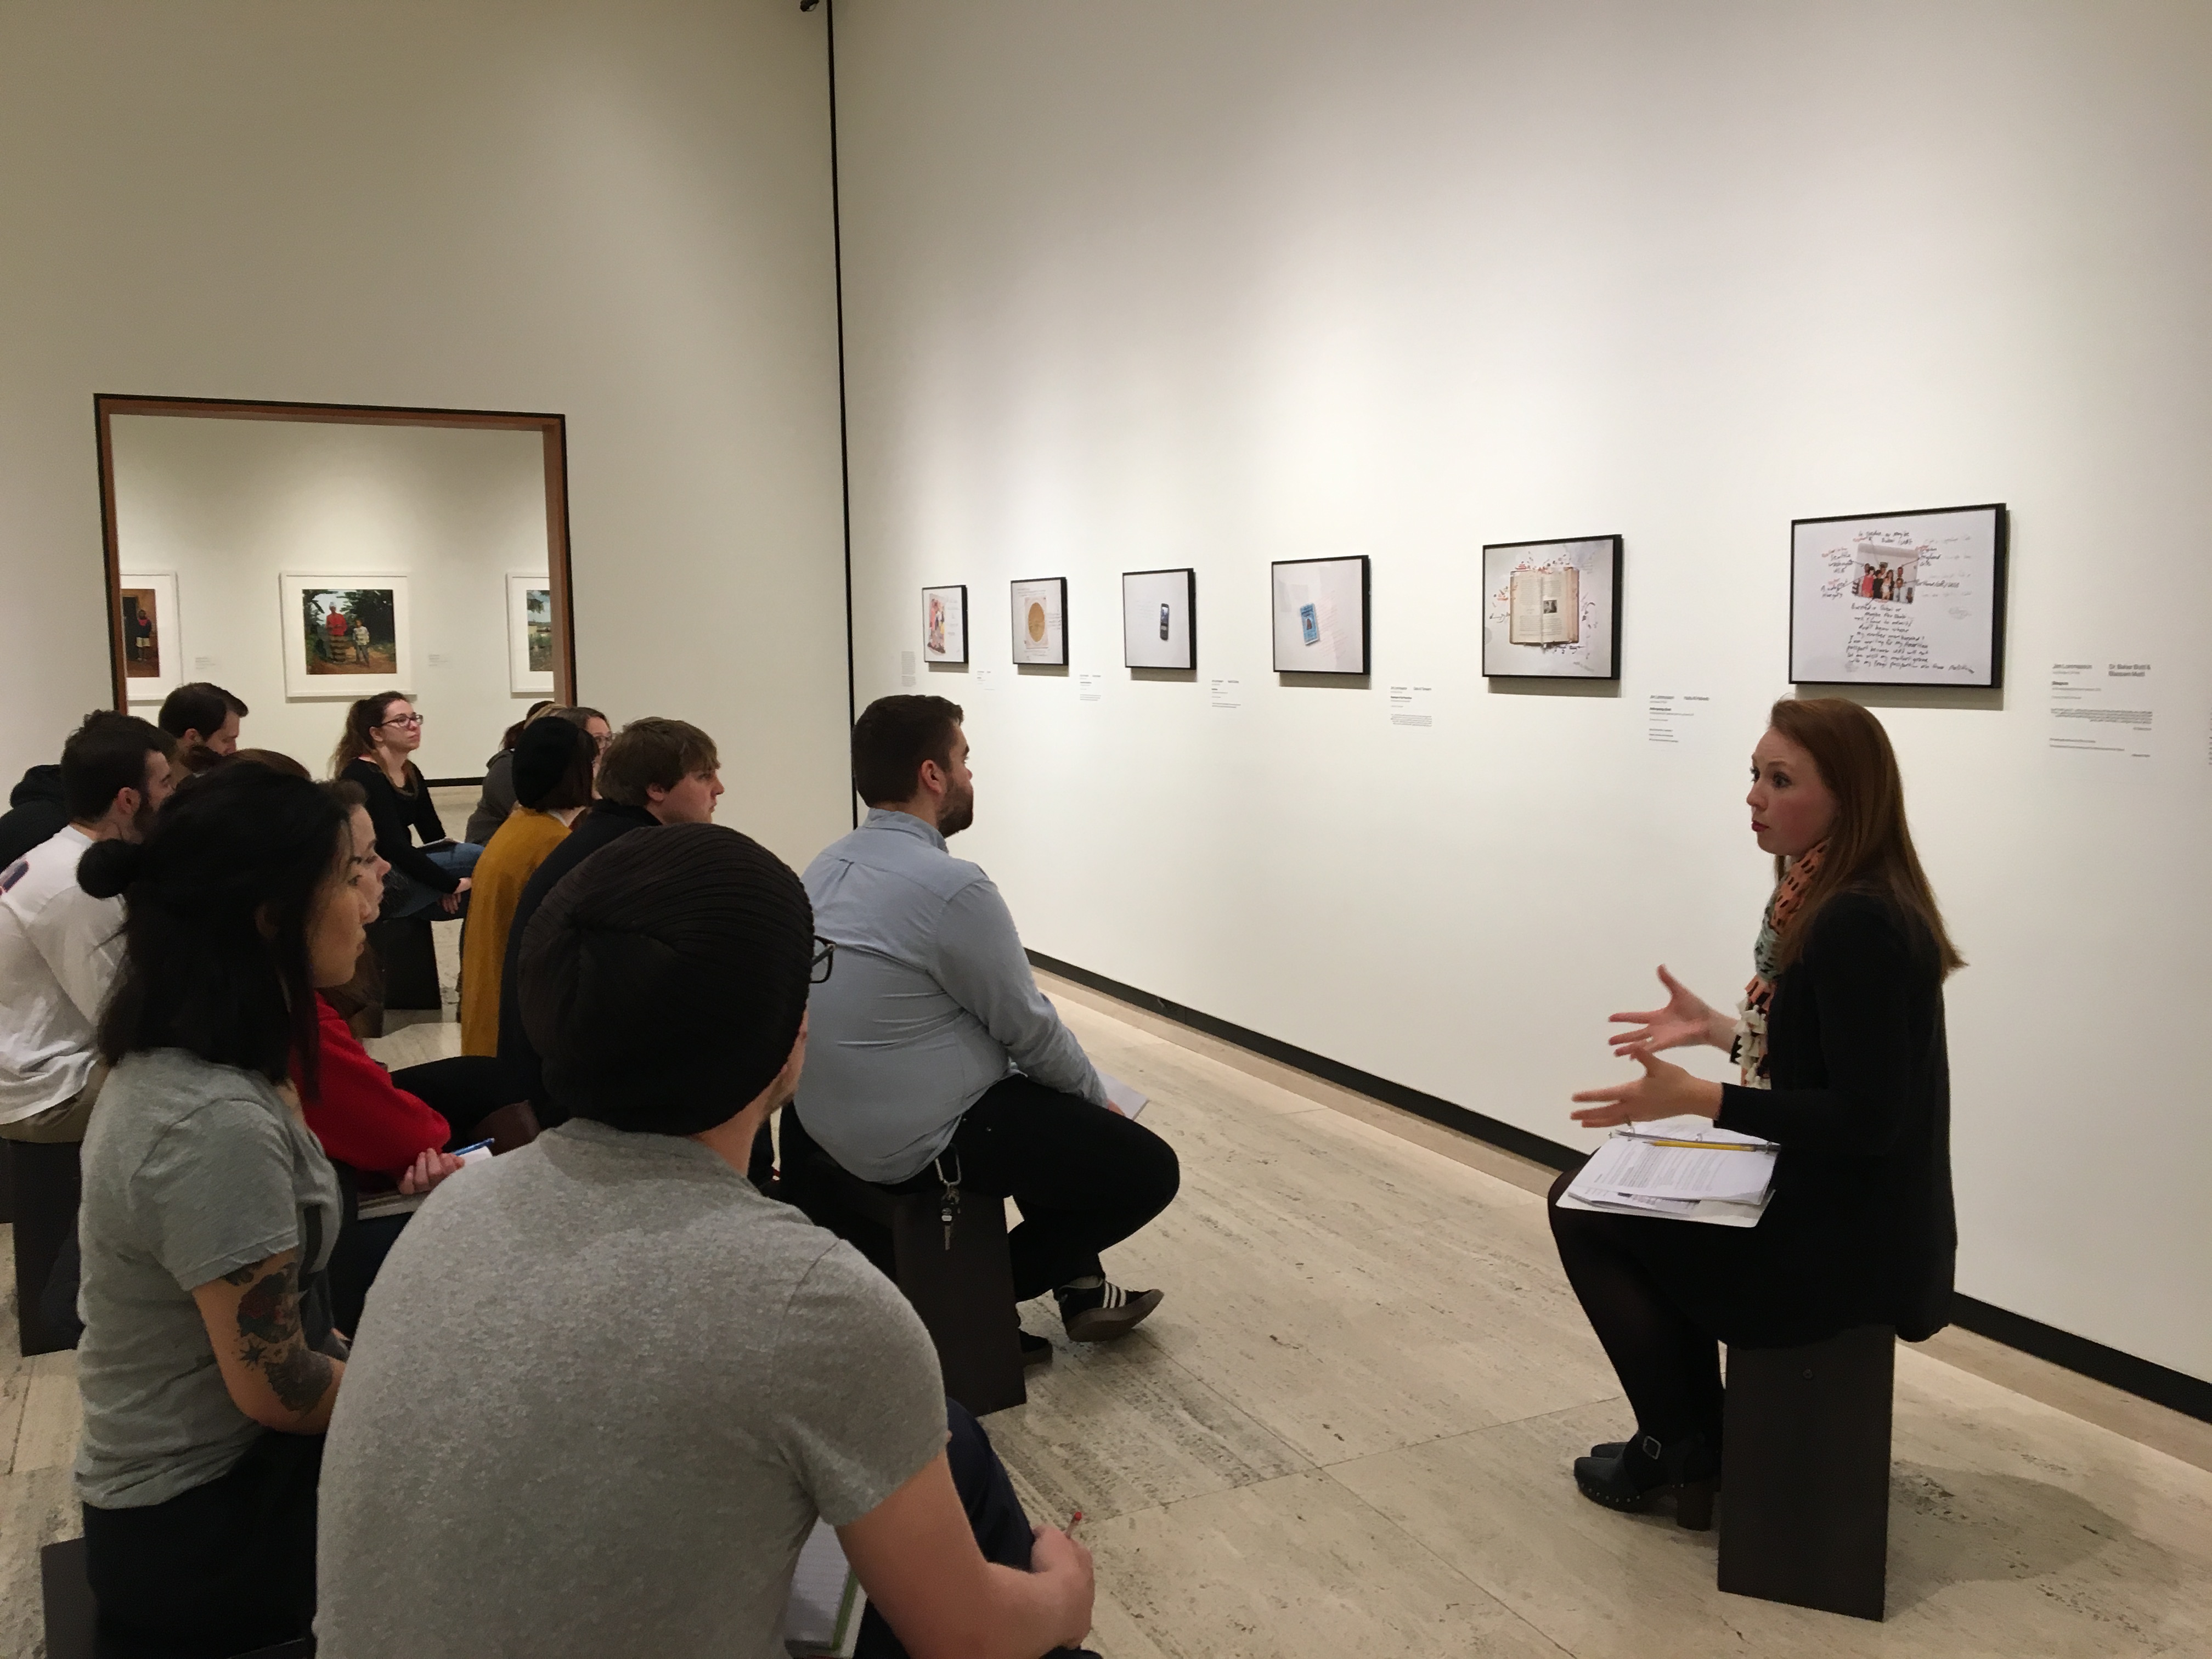 Students in the Nebraska Mosaic class listen as Abby Groth, assistant curator of public programs, (far right) discusses the nuances of Jim Lommasson’s exhibit at the Sheldon Art Museum. (Photo by Michelle Hassler)